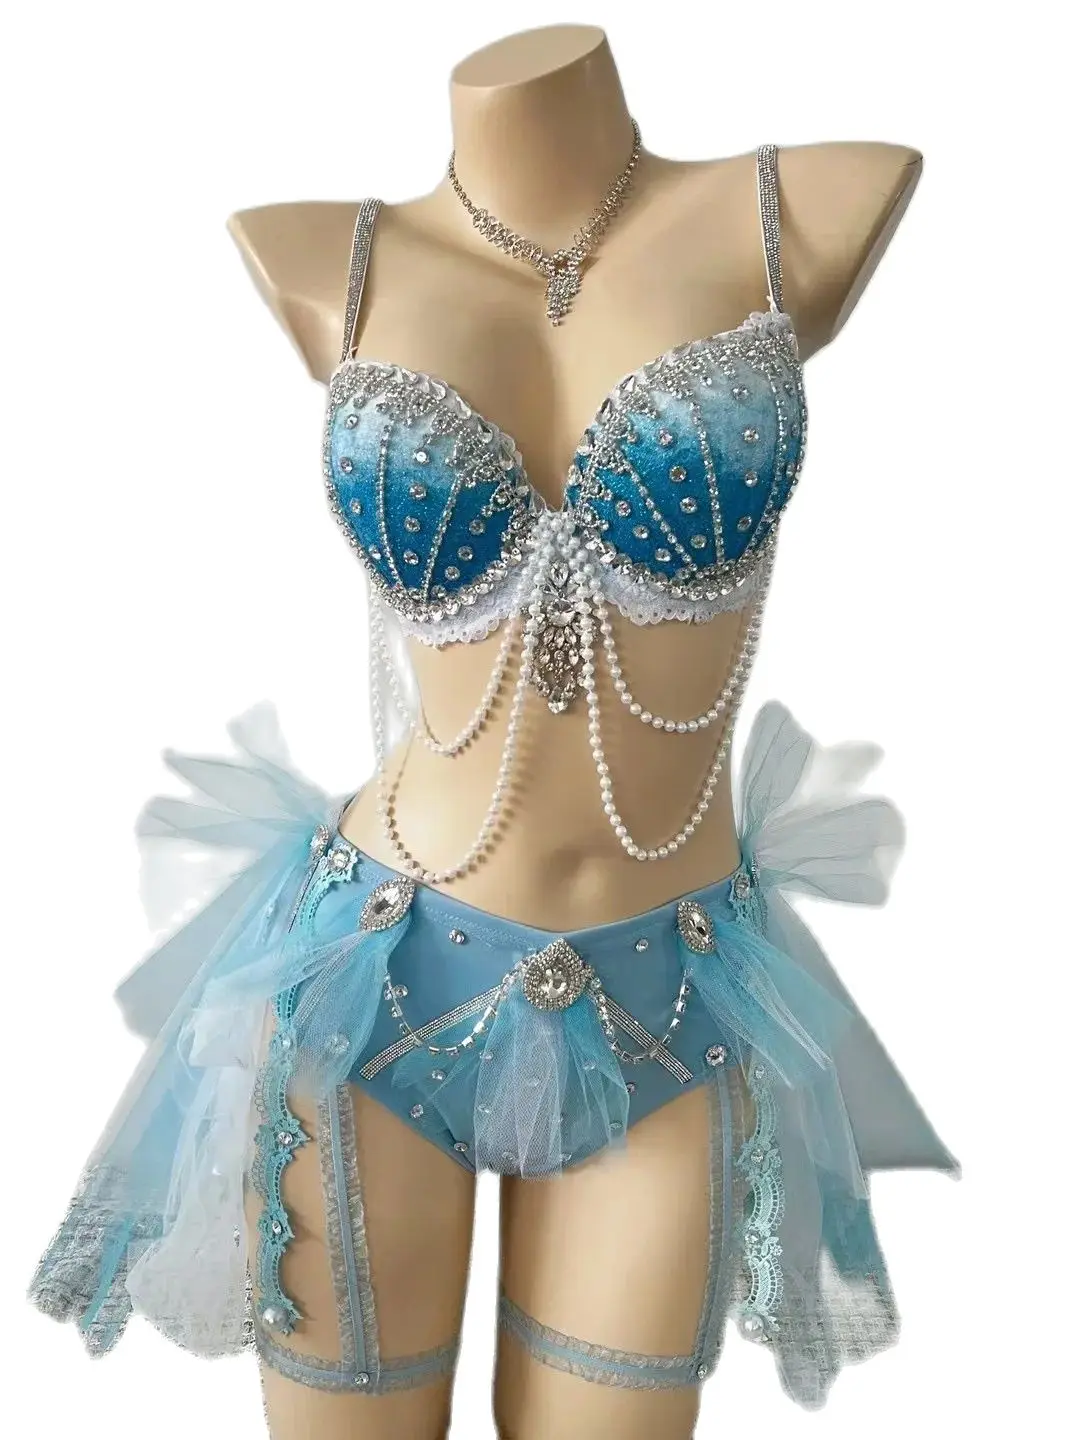 

New Blue Sexy Nightclub Wear Woman Jazz Dance Costume Gogo Dancing Suit Dj Ds Rave Outfit Party Performance Show Costume Set